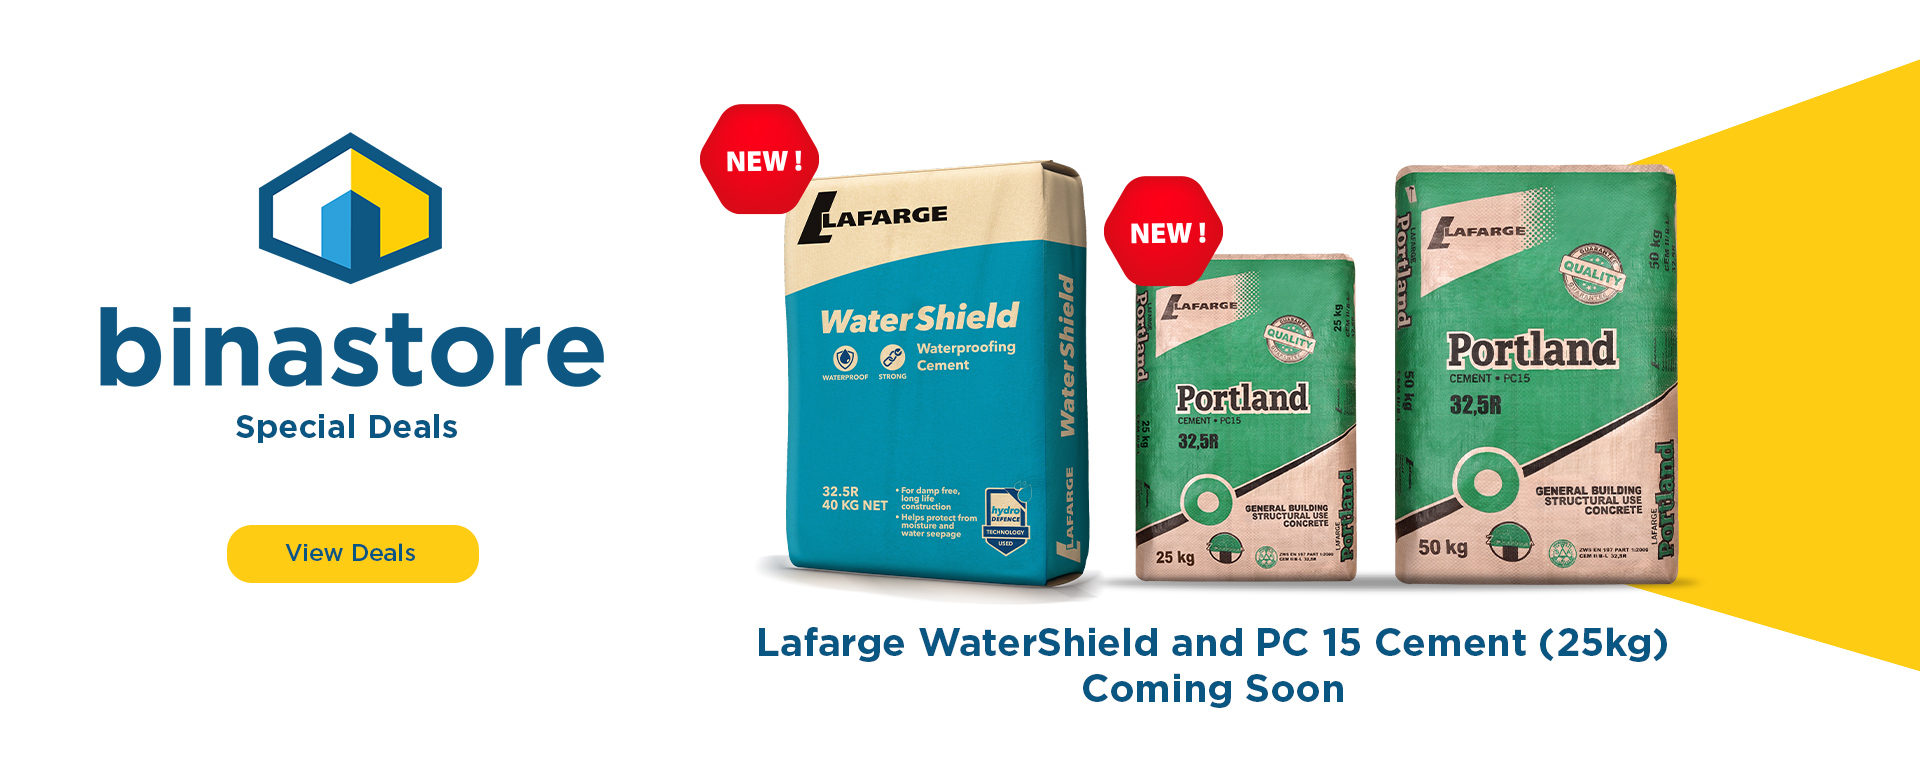 LaFarge Watershield and PC 15 Cement in 25kgs